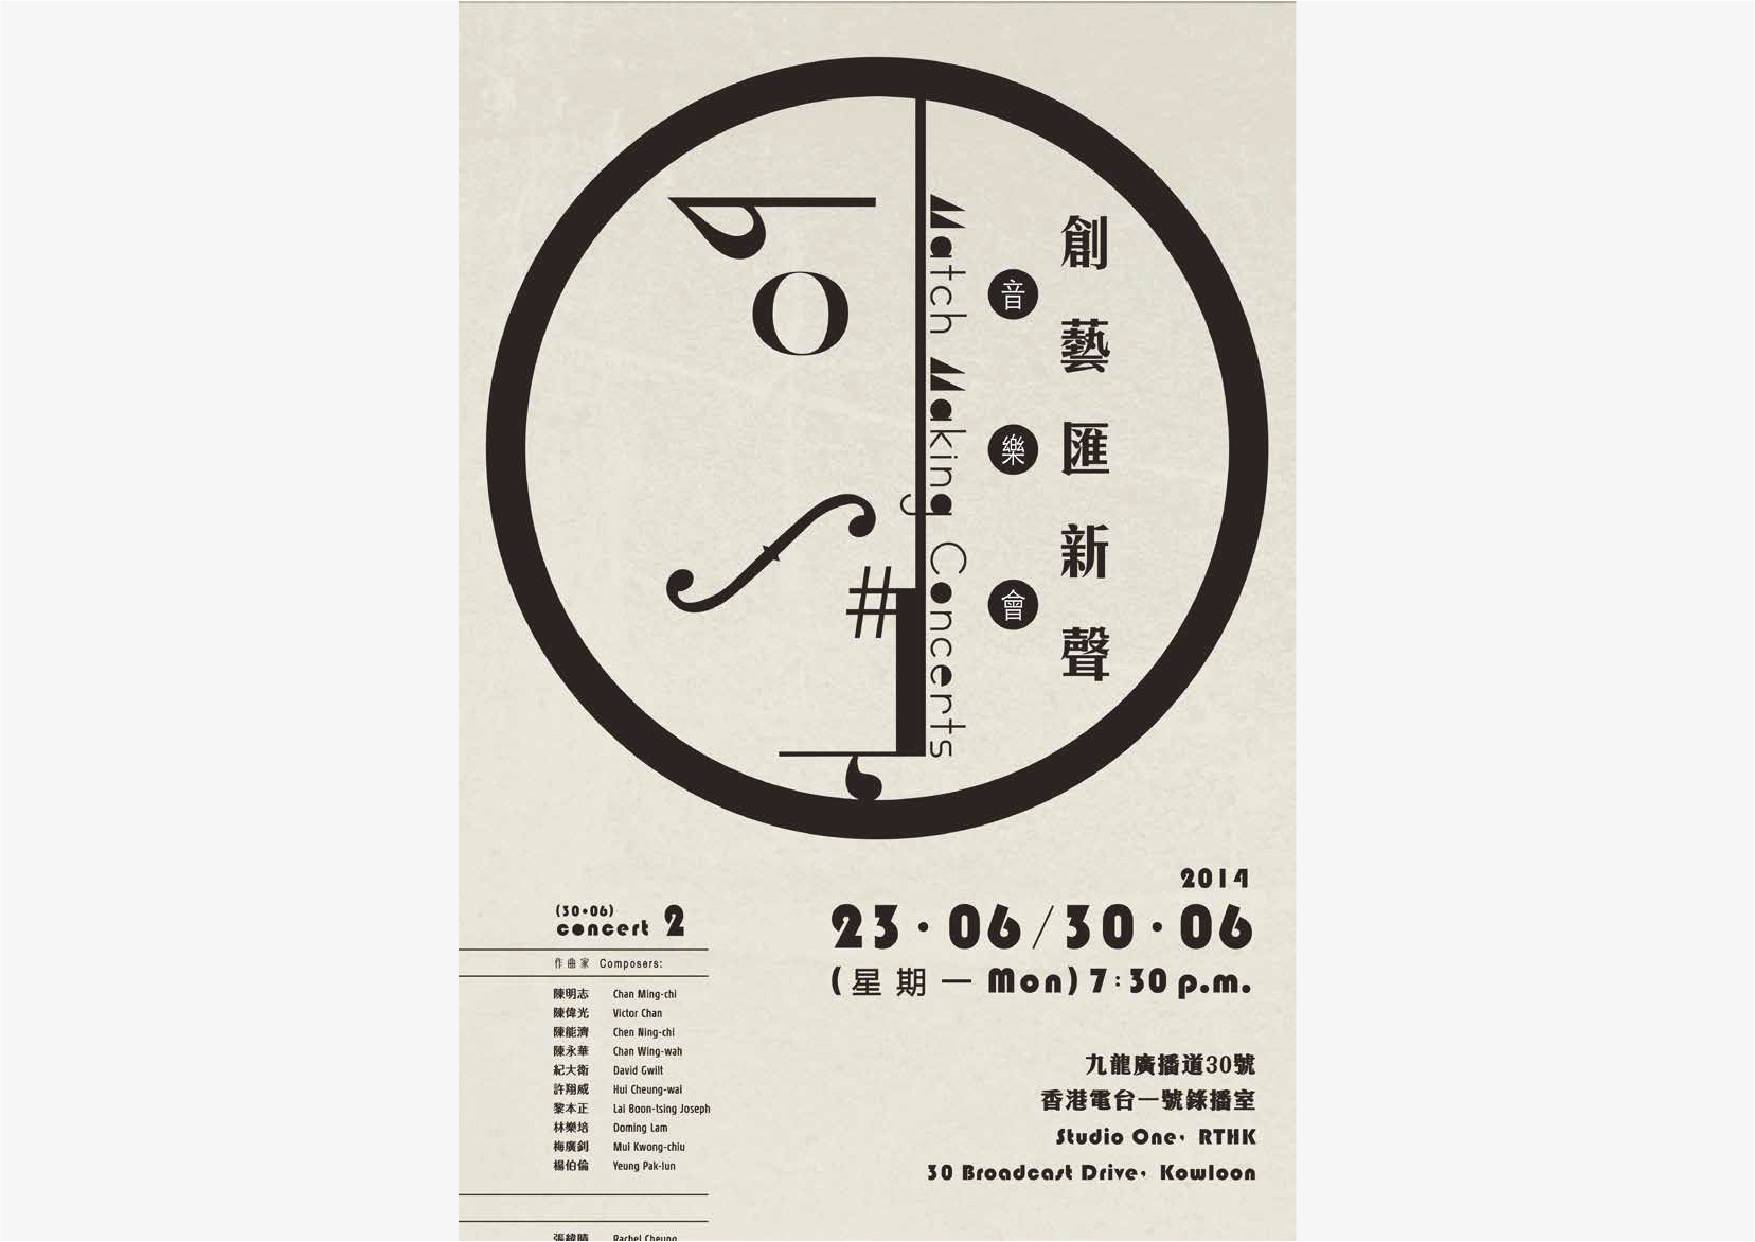 Hong Kong Composers Guild poster design for a concert with a musician iconic